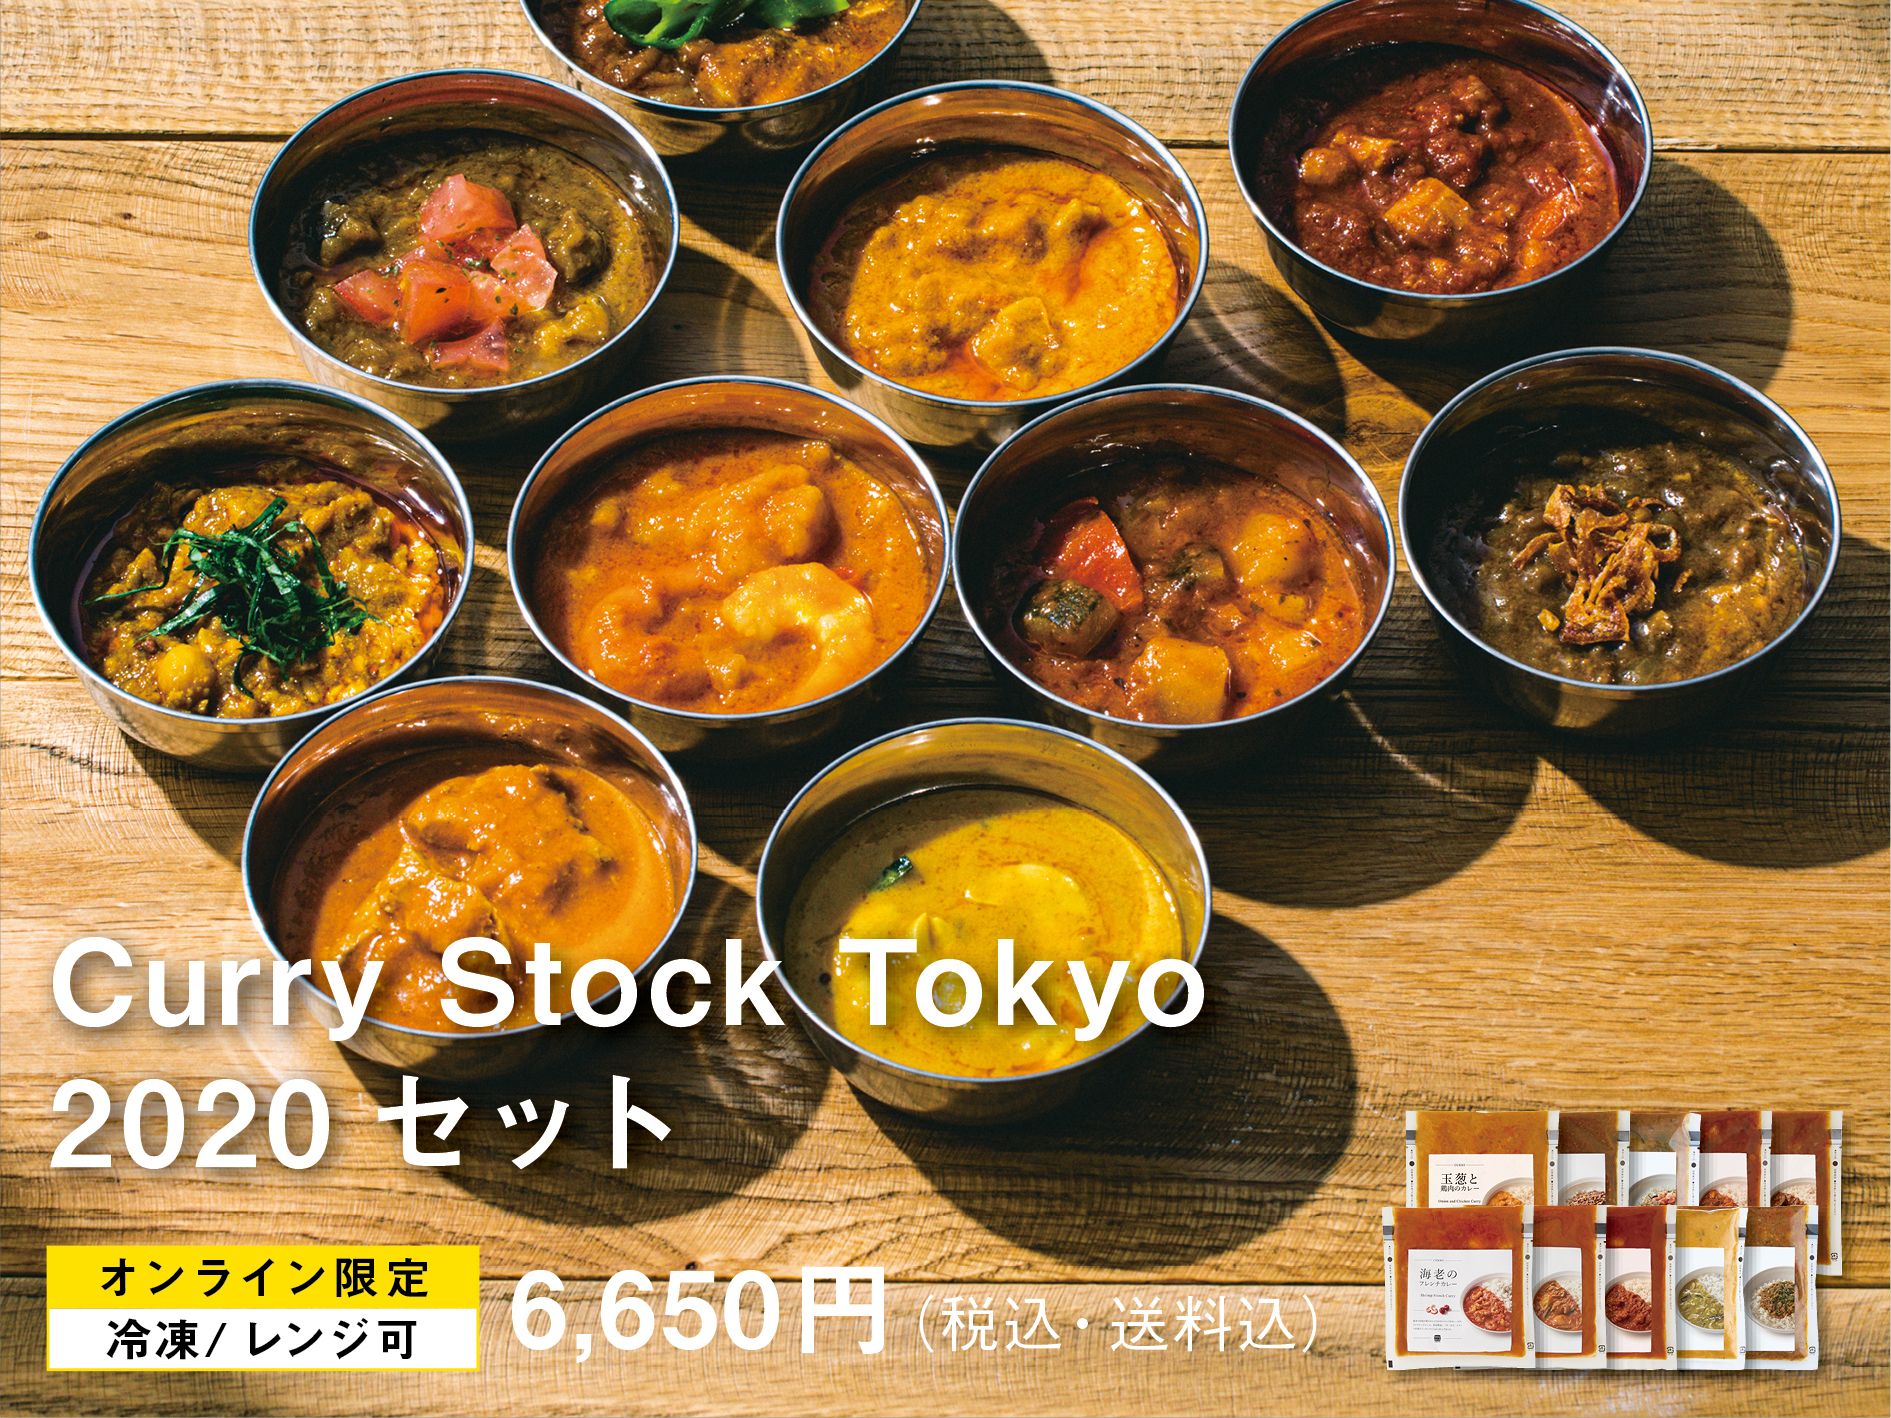 「Curry Stock Tokyo 2020セット」